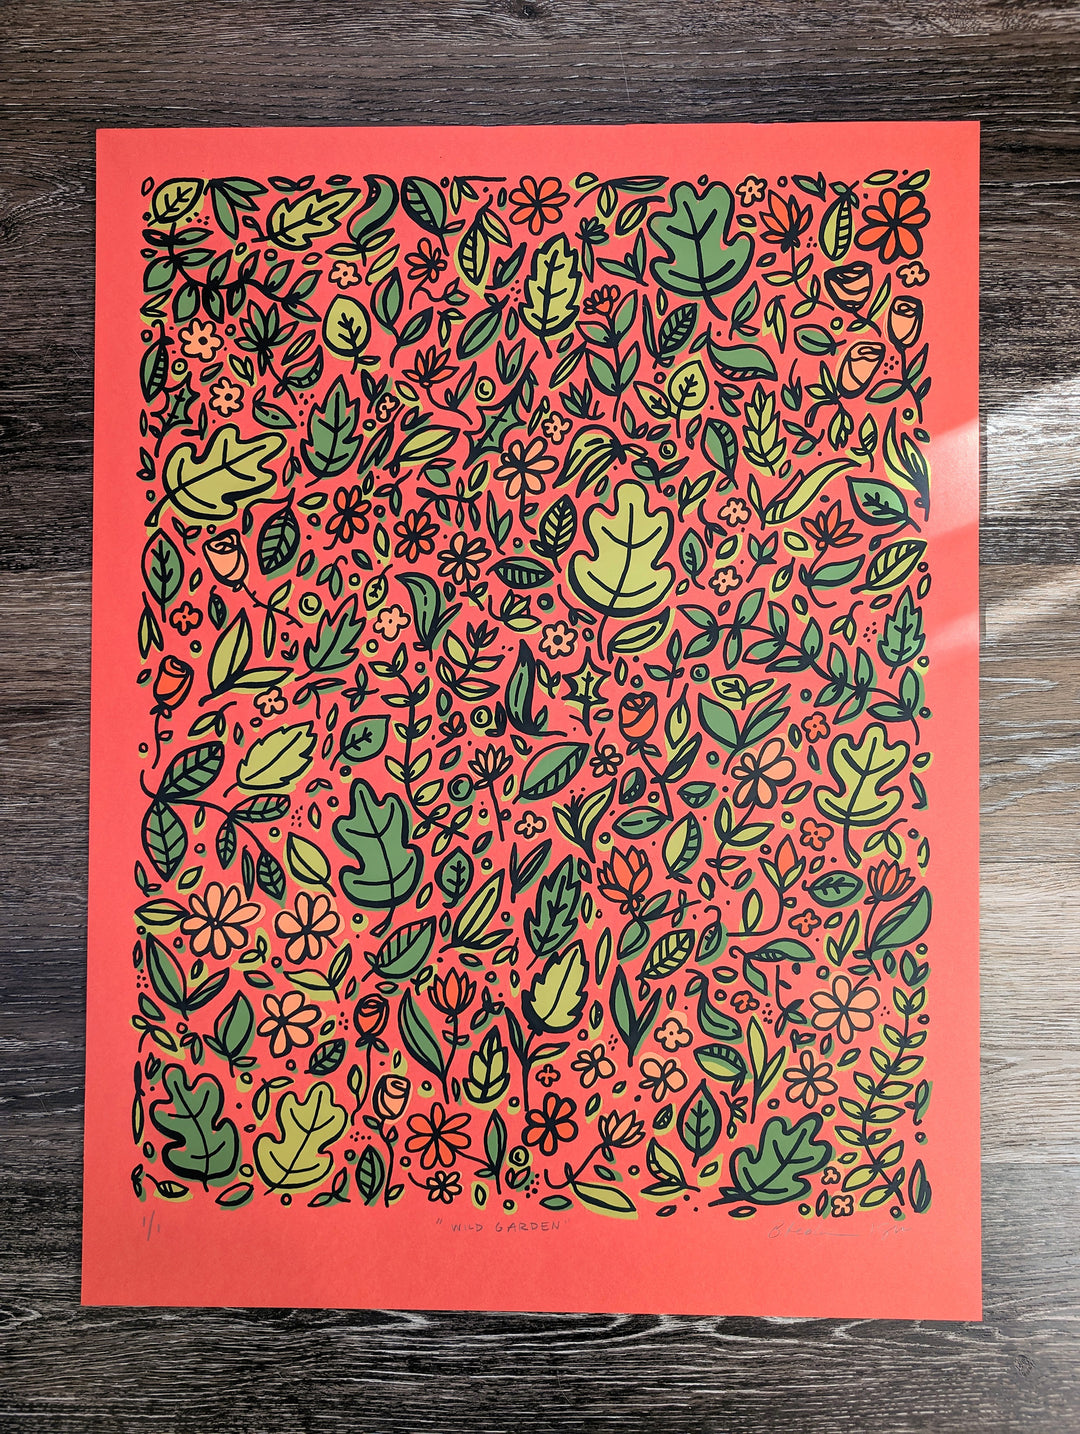 Wild Garden Print on Red by Brainstorm - Limited Edition of 1